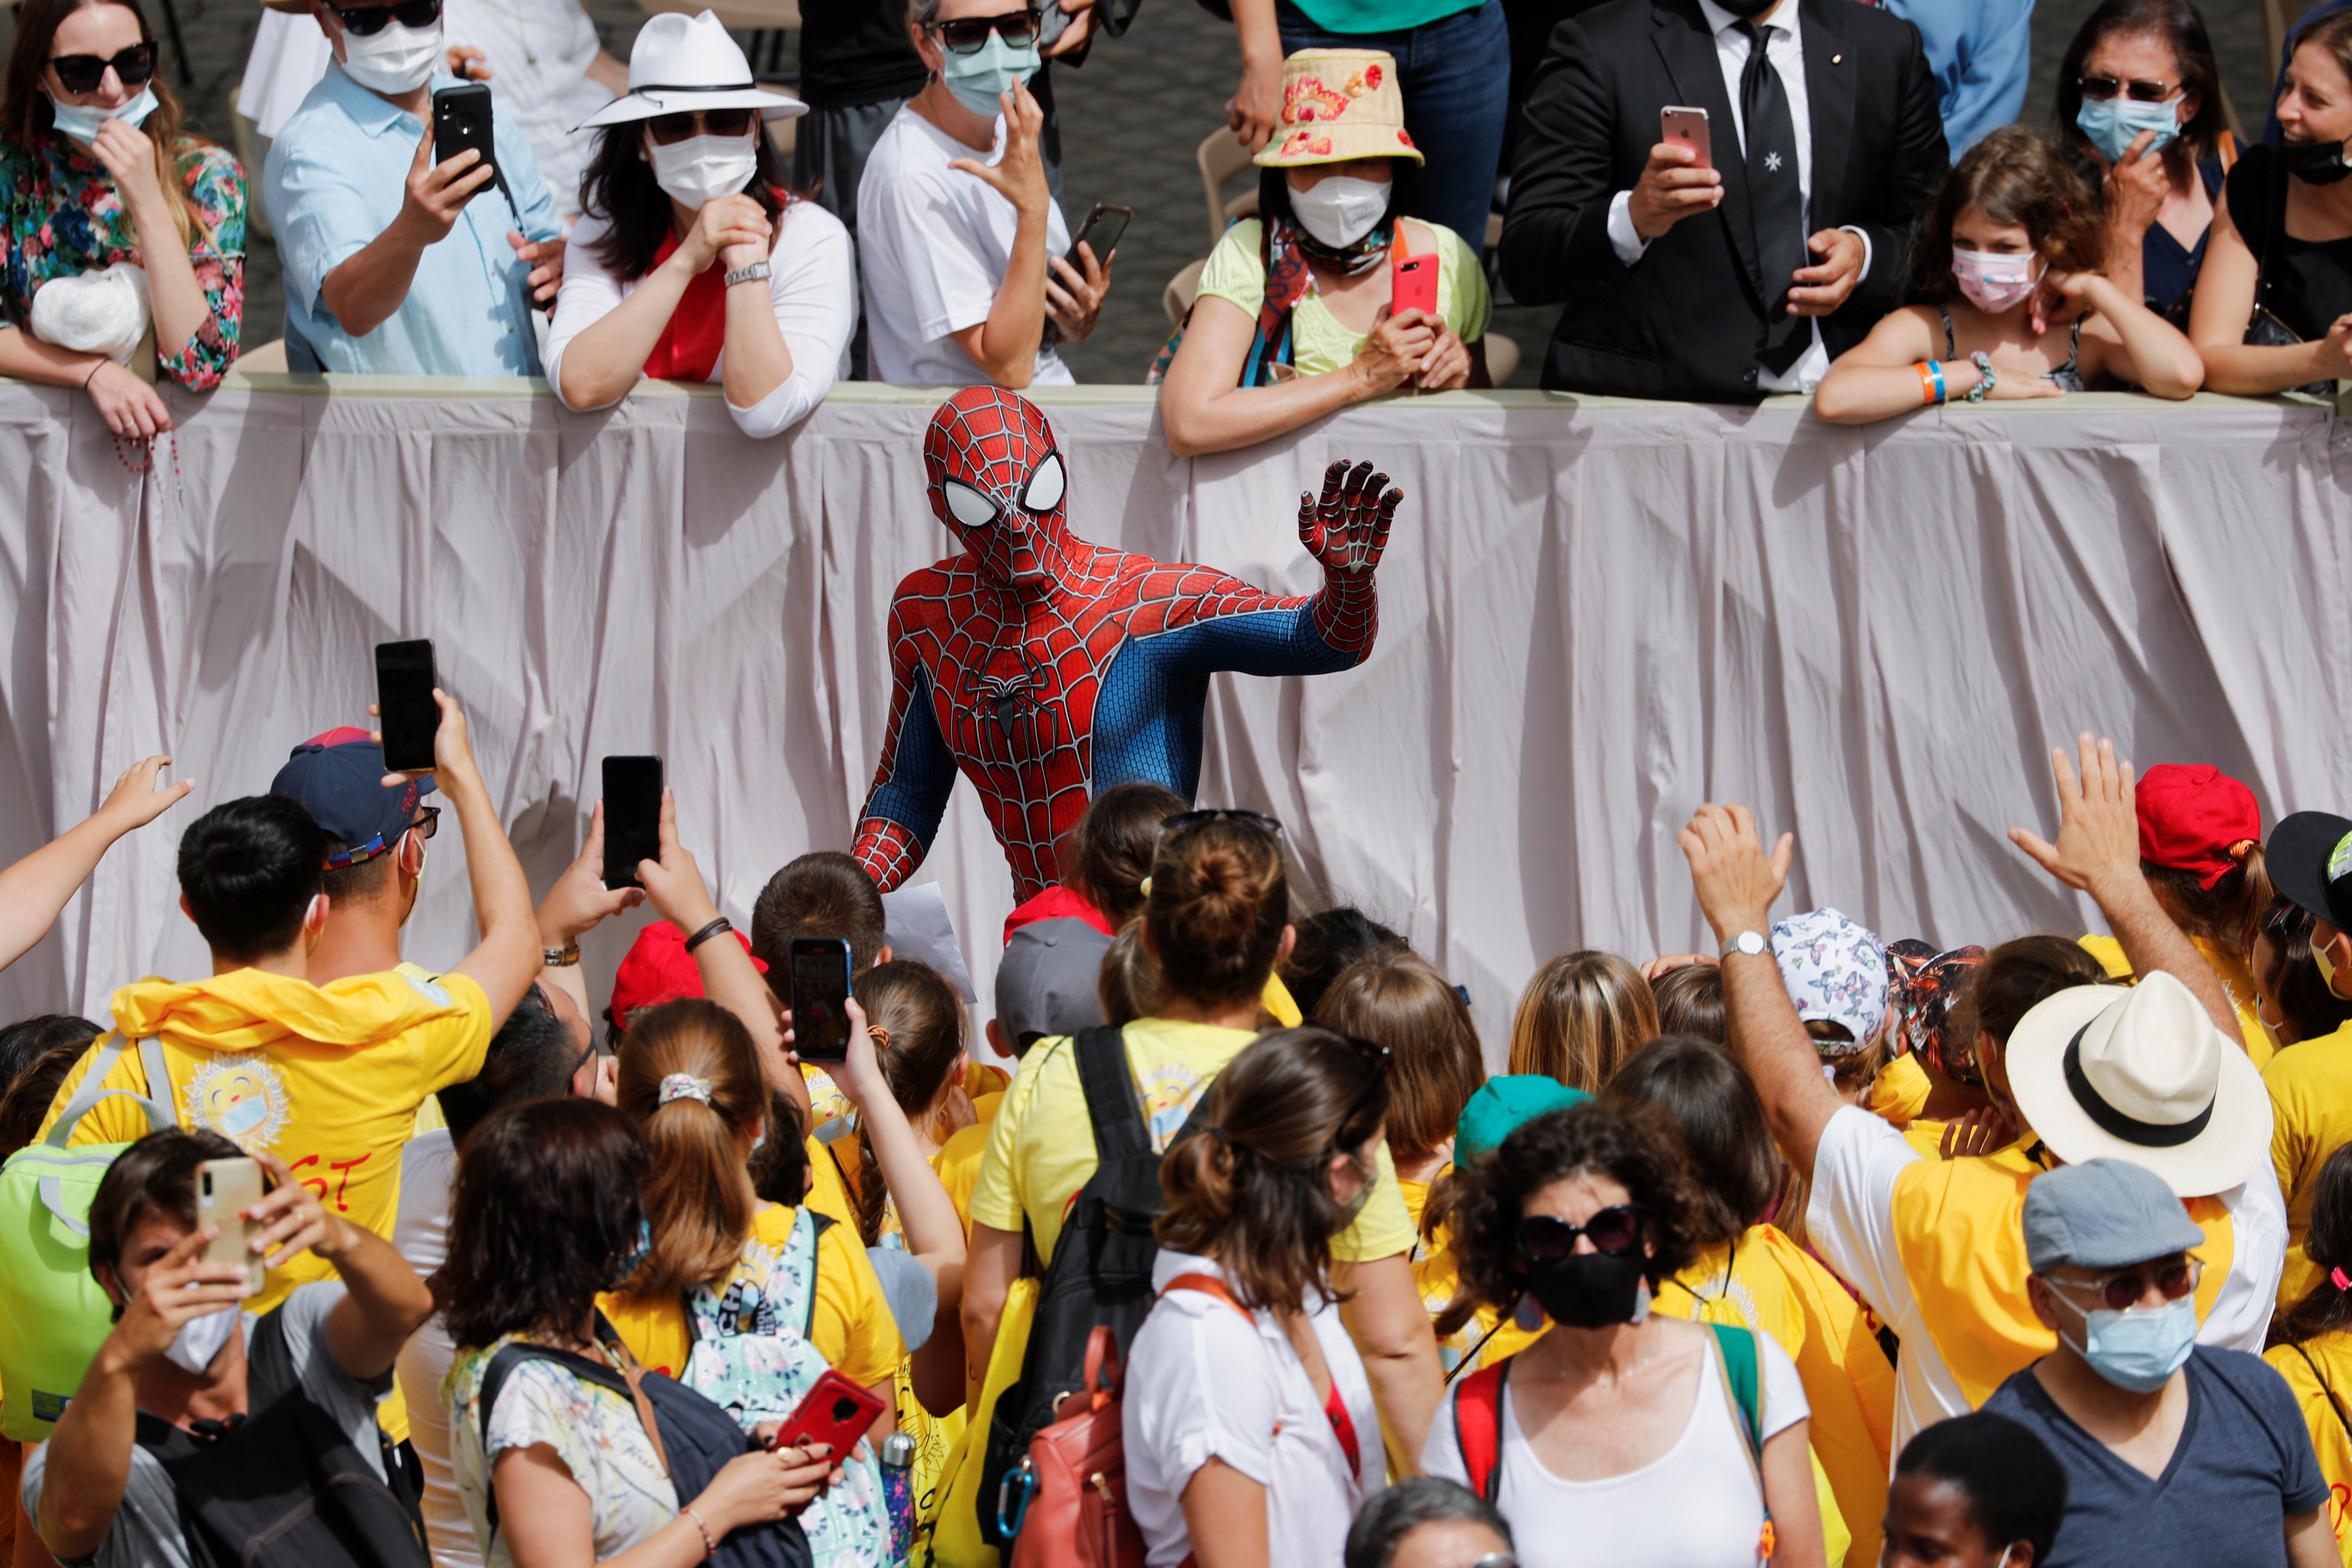 A person dressed as Spiderman leaves after the general audience, amid the coronavirus disease (COVID-19) pandemic, at the Vatican, June 23, 2021. REUTERS/Remo Casilli